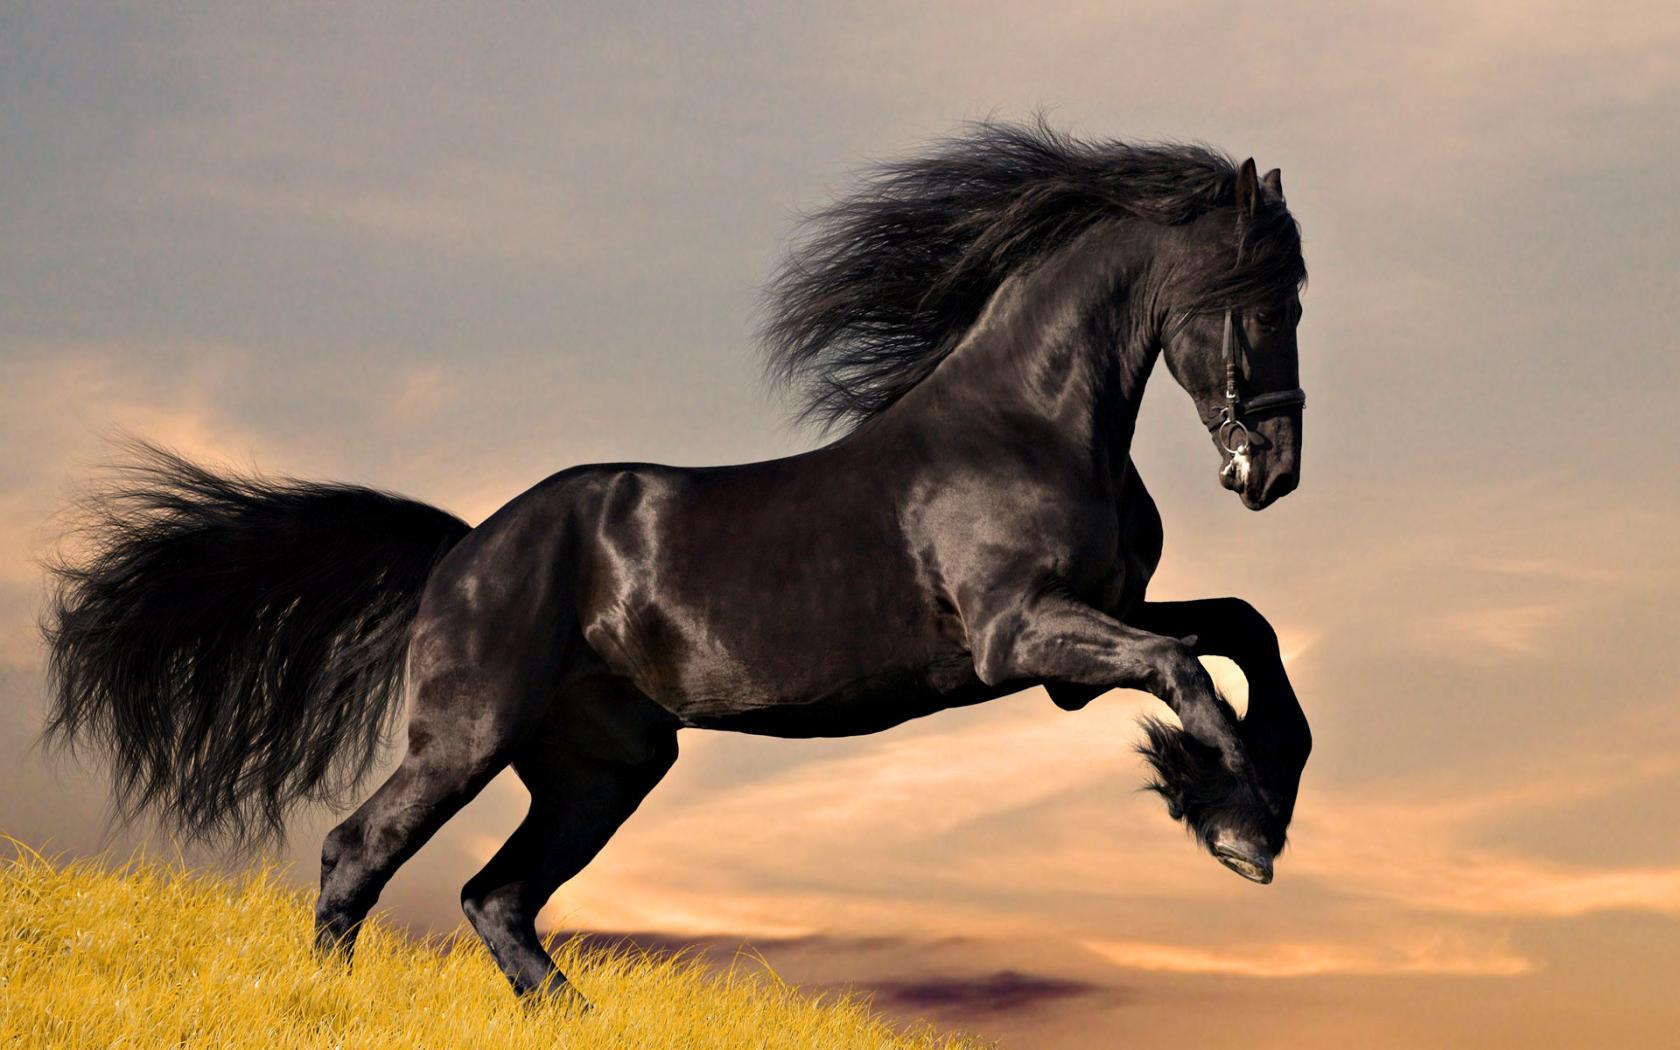 Running Horses Wallpaper HD, image collections of wallpaper